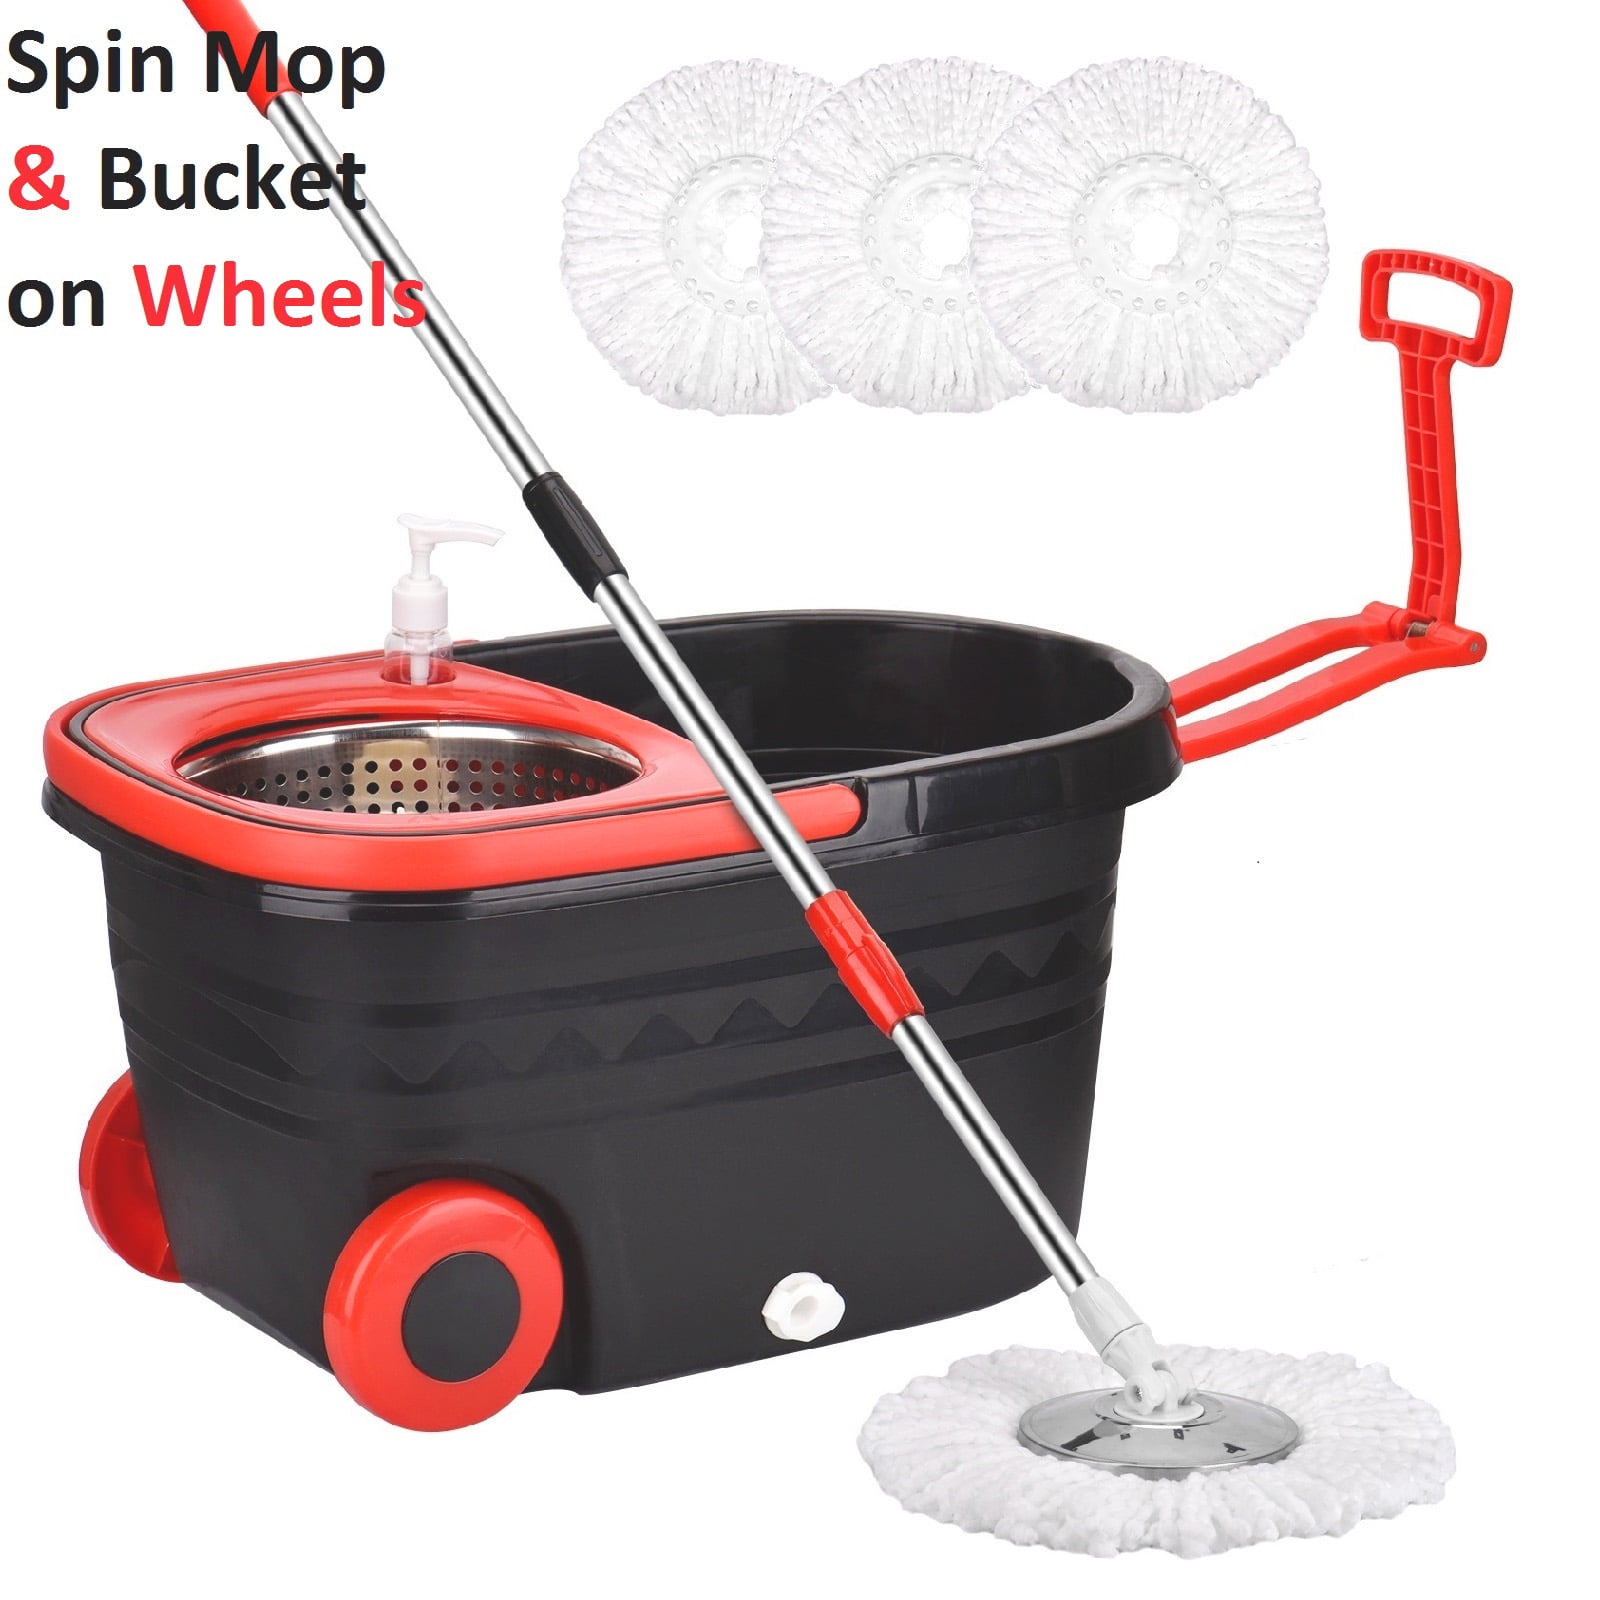 PULNDA Spin Mop & Bucket System, Mop and Bucket Wringer Set, Easy Wring Mop Bucket Wheels, 360 Degrees Stainless Steel Spin Mop with Extra Refills, Black & Red - Walmart.com